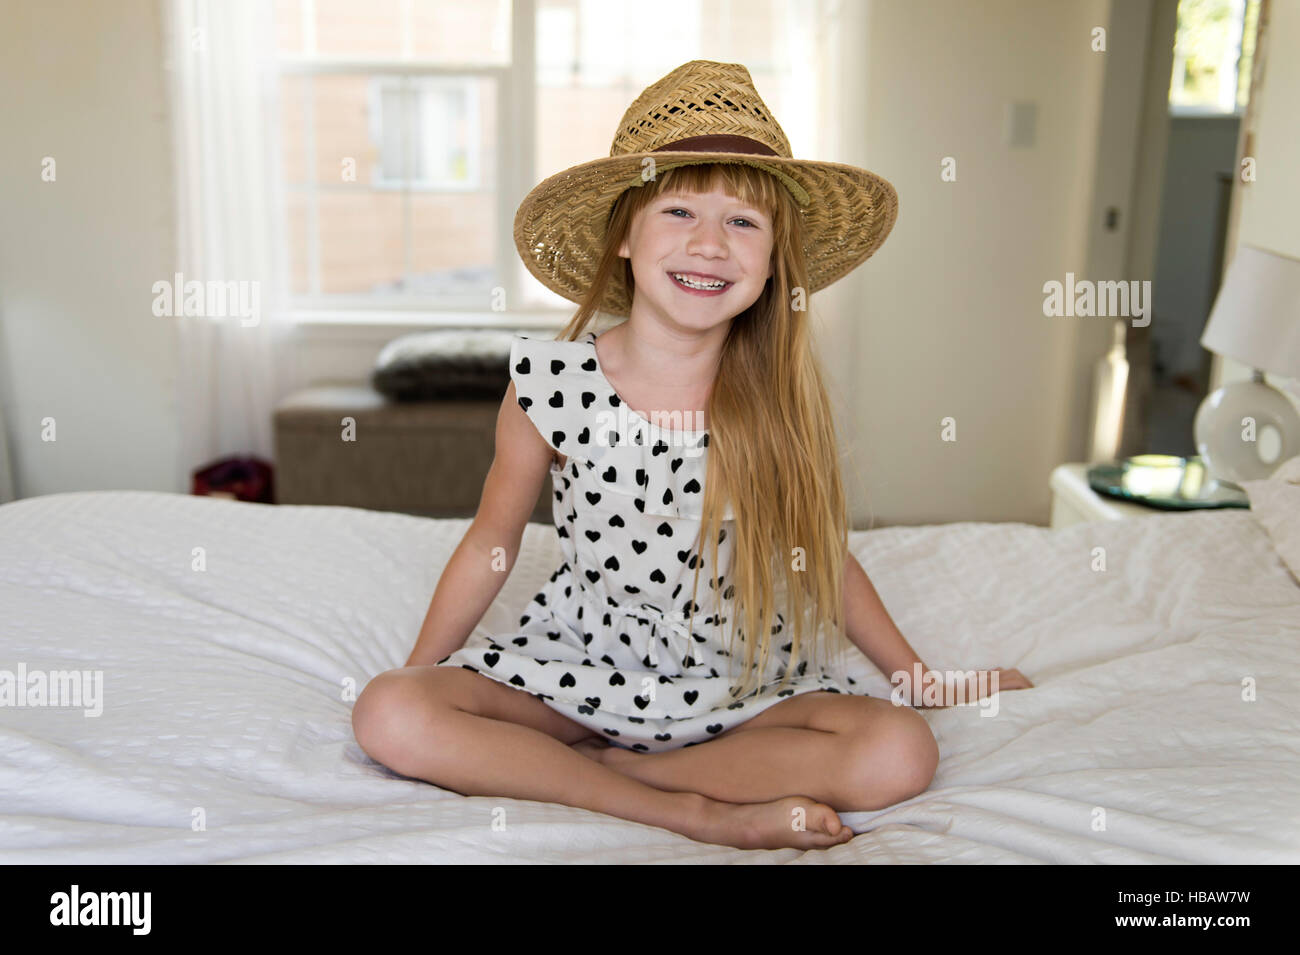 Young girl sitting on bed smiling, wearing straw hat Stock Photo